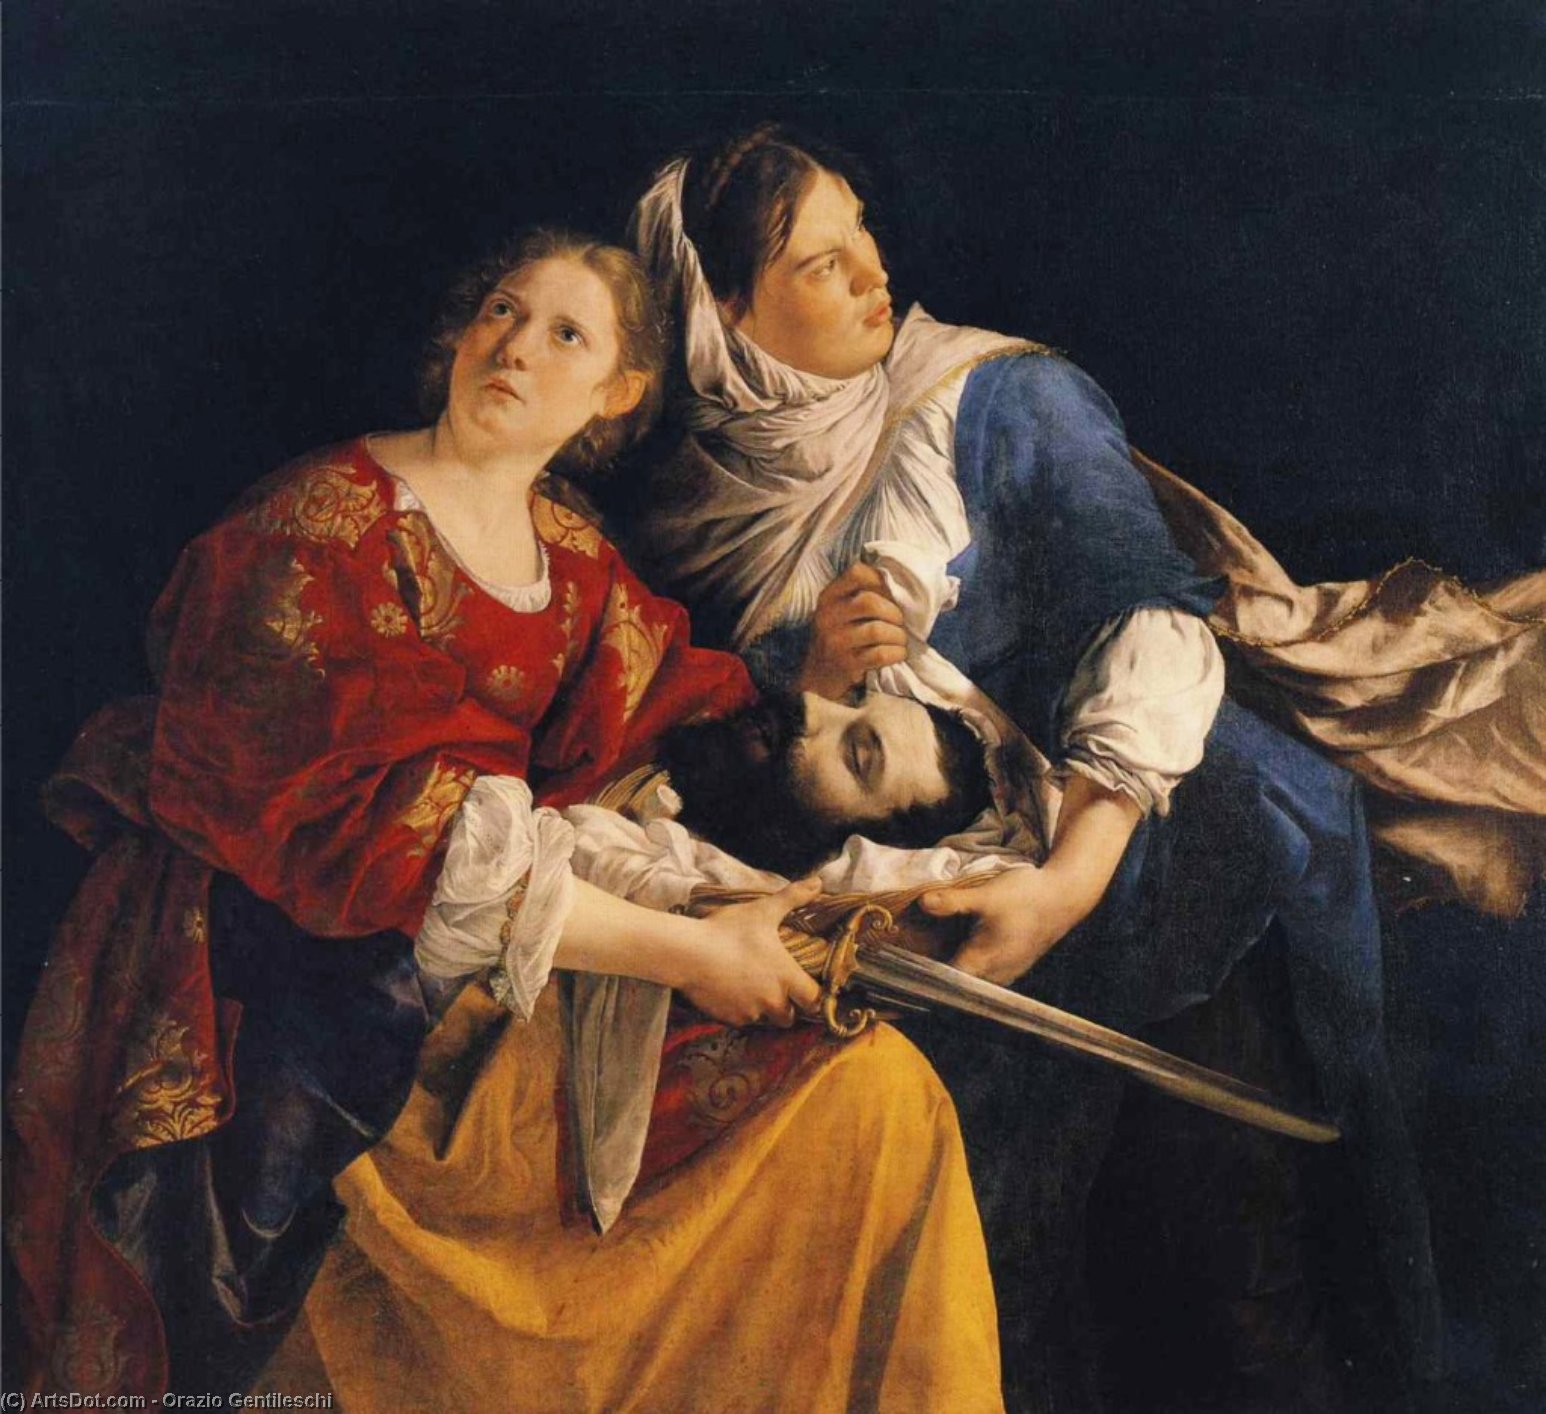 WikiOO.org - 백과 사전 - 회화, 삽화 Orazio Gentileschi - Judith and Her Maidservant with the Head of Holofernes